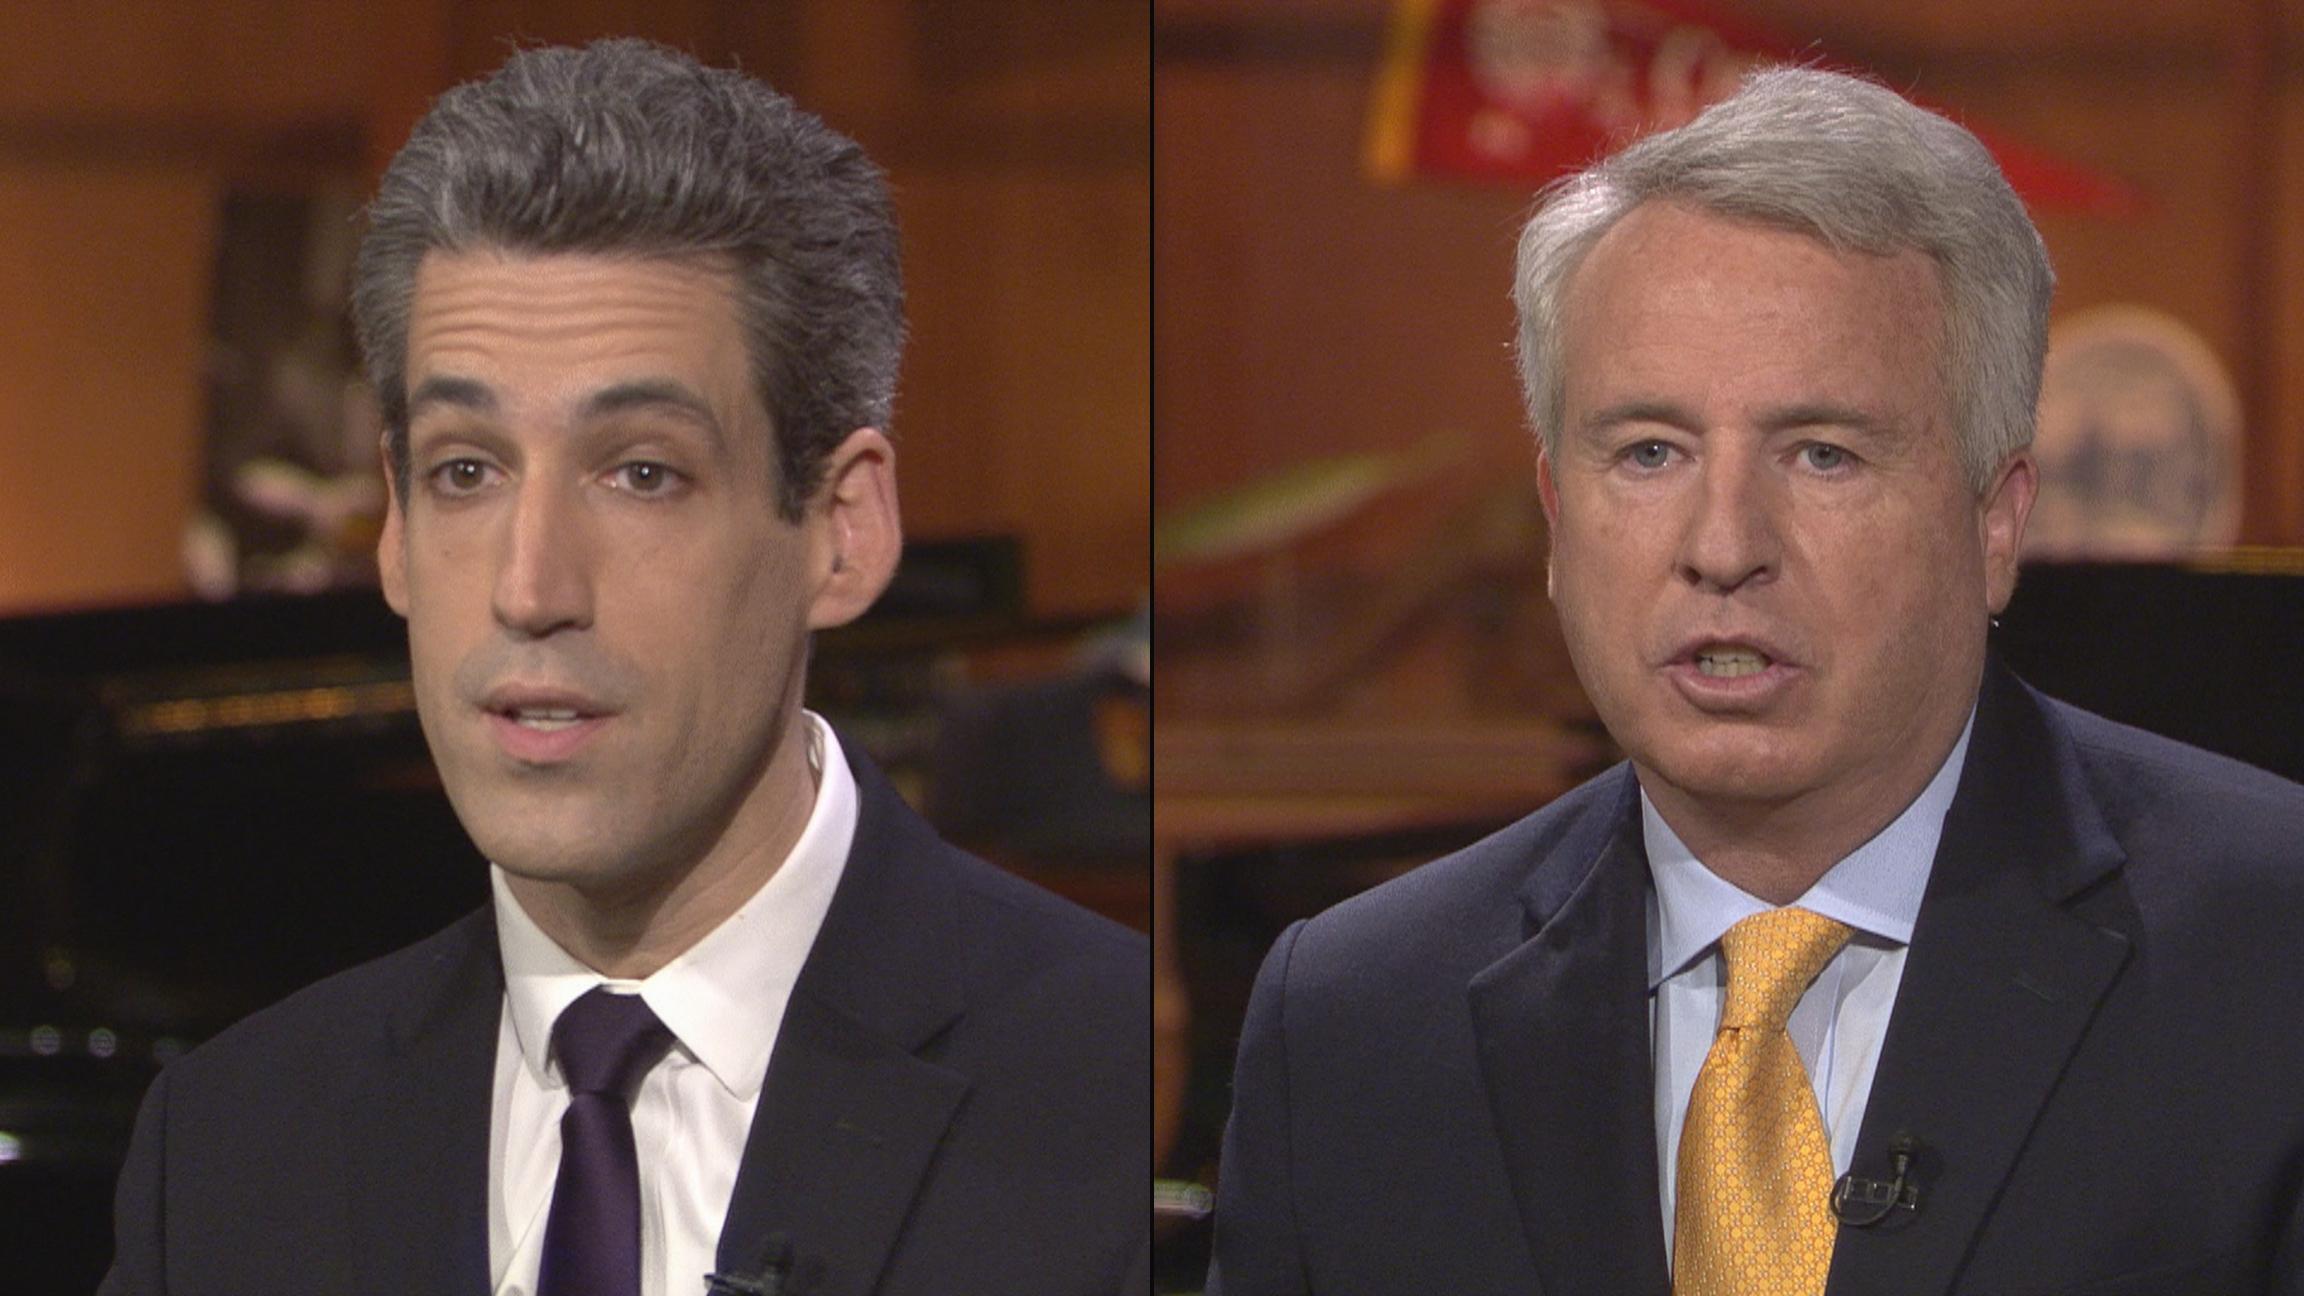 Democratic candidates for governor Daniel Biss, left, and Chris Kennedy participate in a candidate forum at WTTW on Monday.